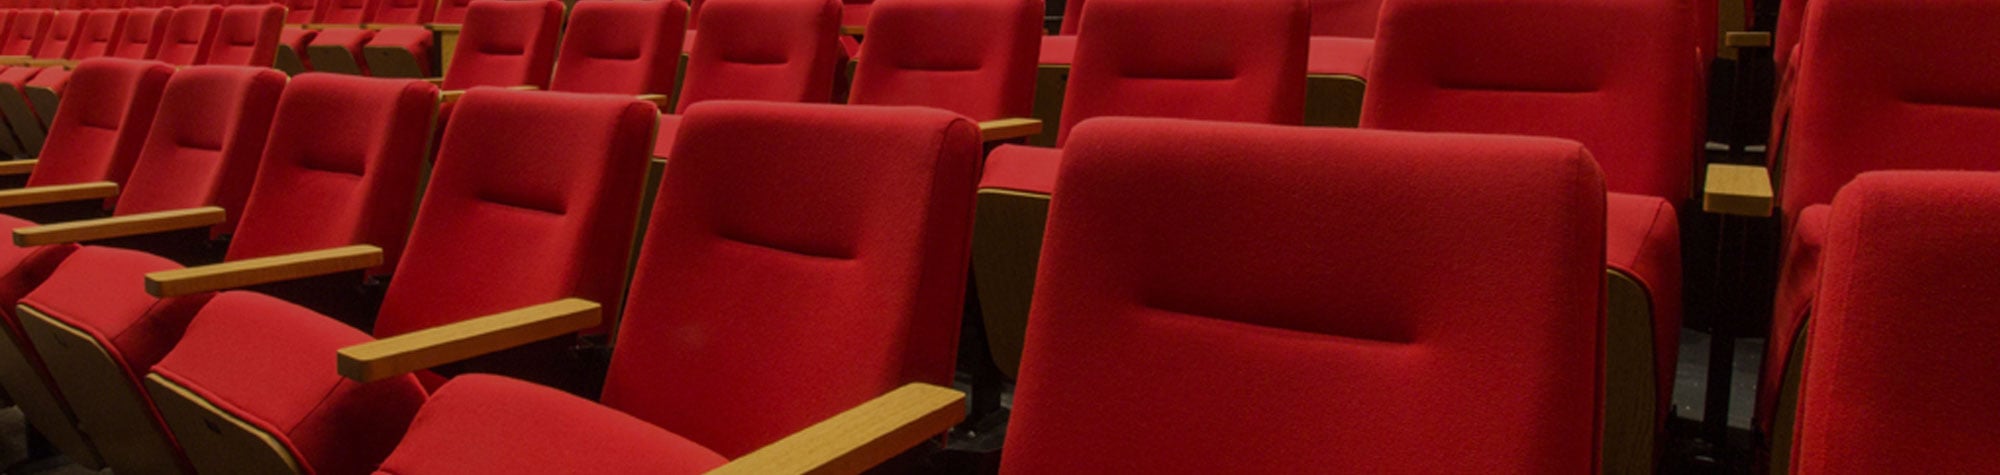 Fixed Seating For Commercial Theater Clients